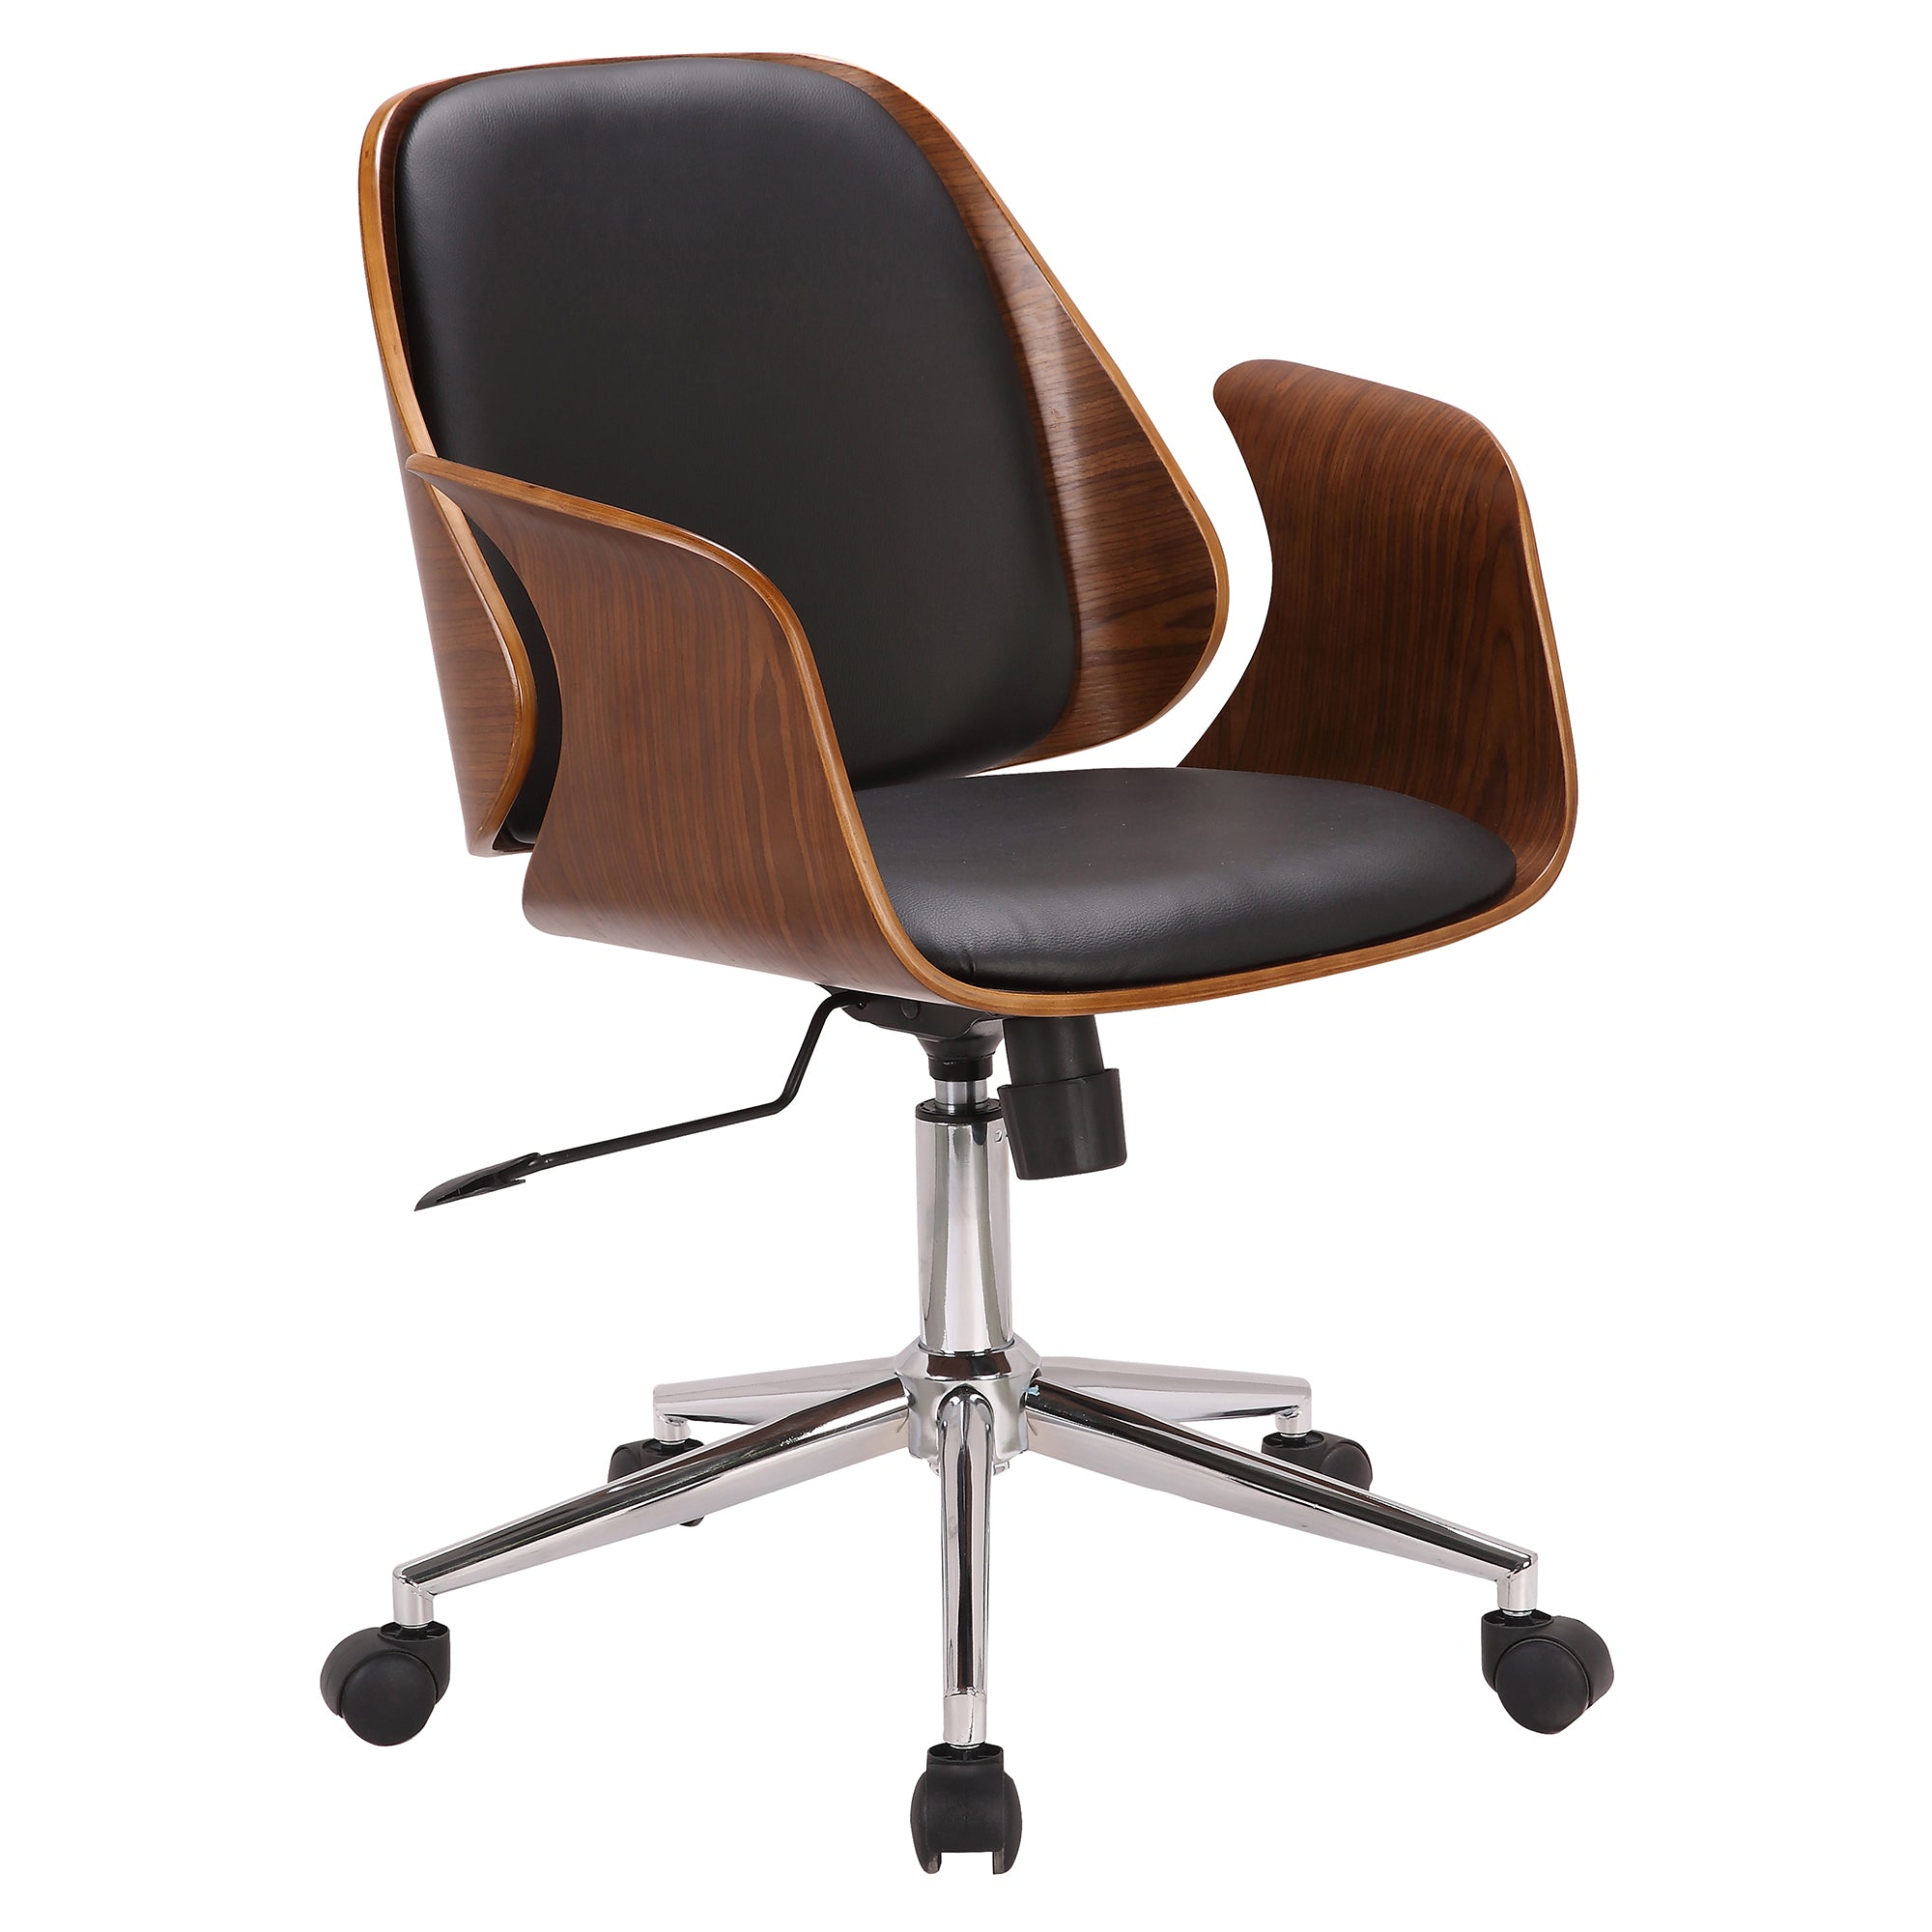 Armen Living Lcsgofchwabl Santiago Mid-century Office Chair In Black Faux Leather With Walnut Wood Finish